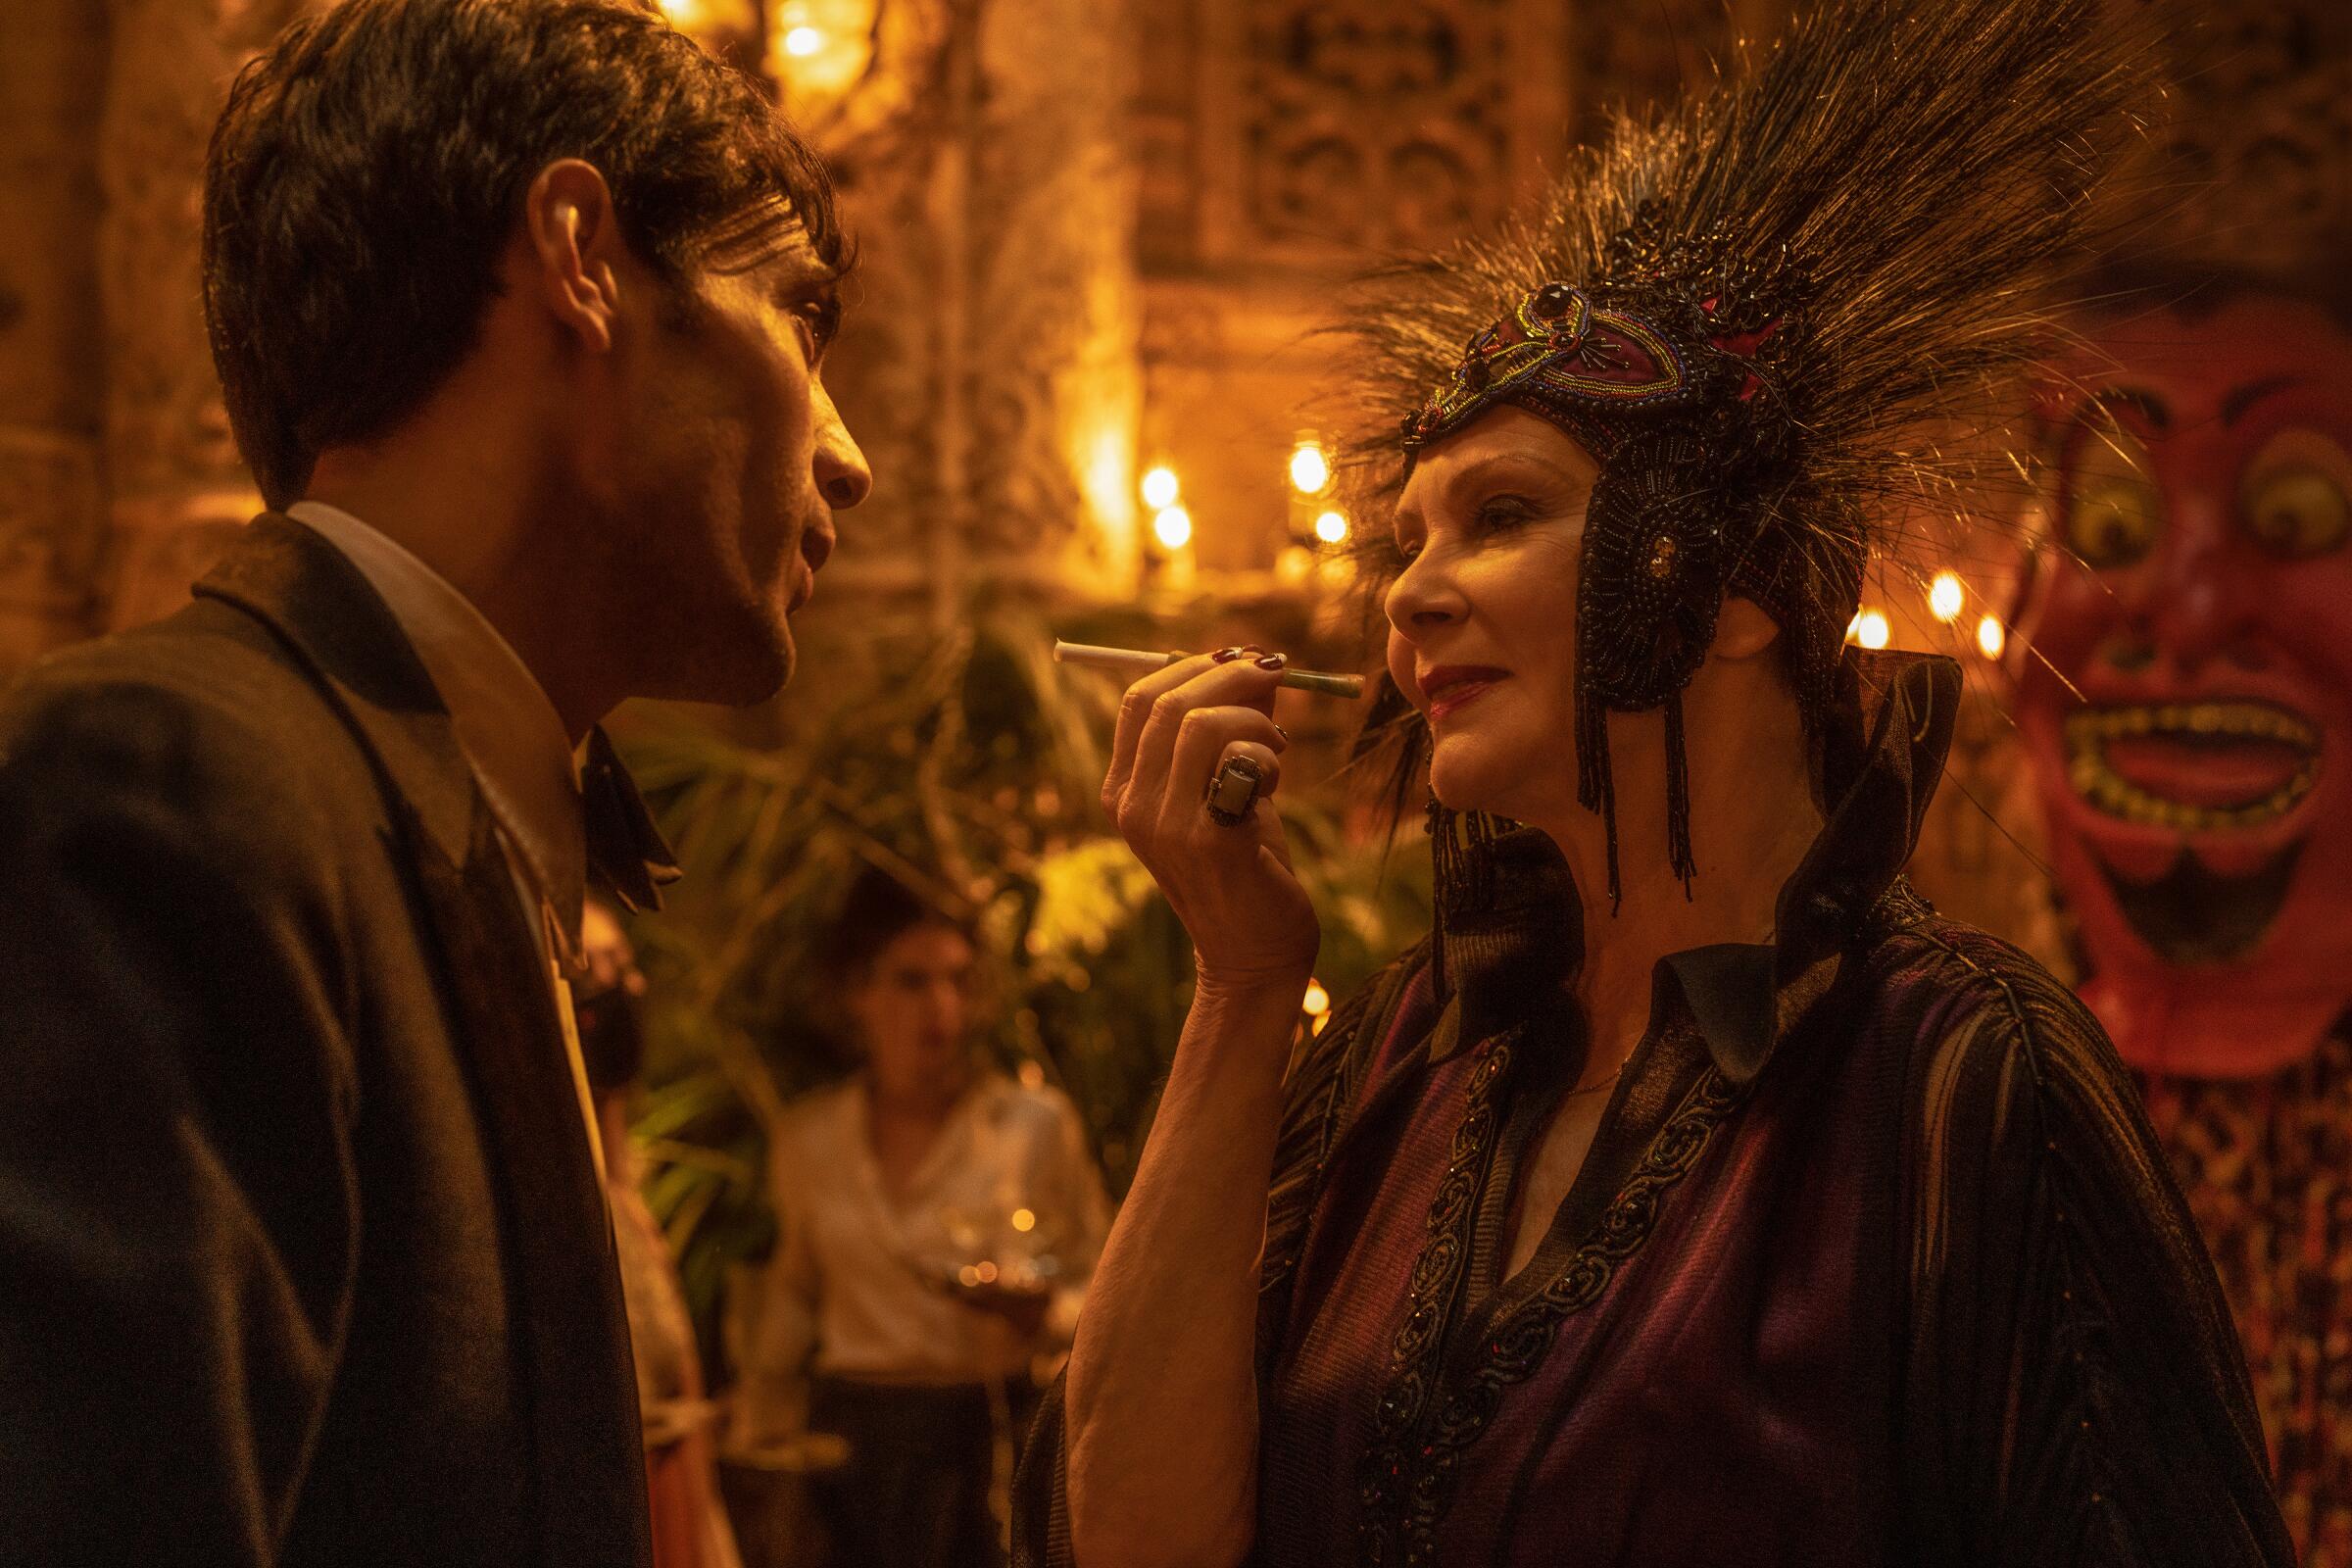 A man in a suit talks with a woman in a spiky headdress in a scene from "Babylon."